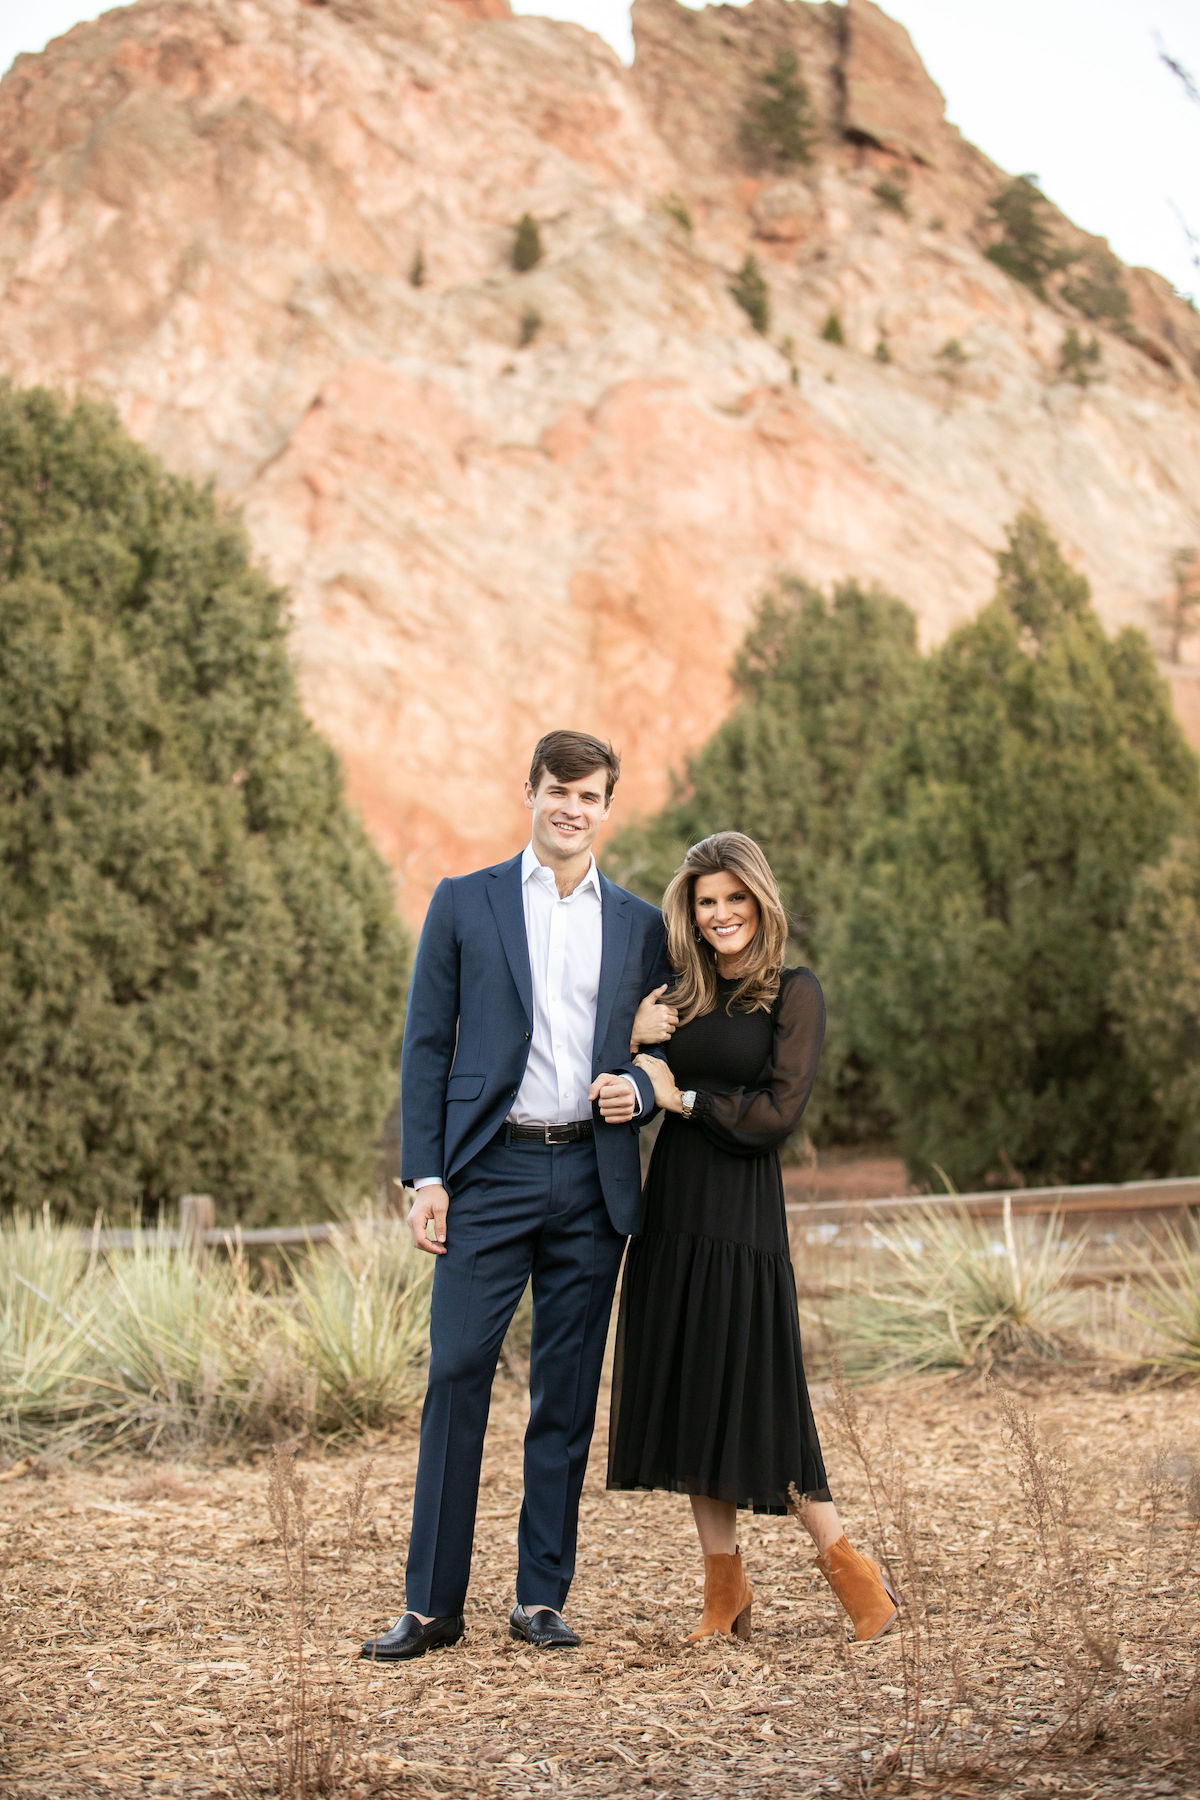 brighton and duncan engagement photos, garden of the gods engagement photo shoot, what to wear for engagement photos, Colorado engagement photos